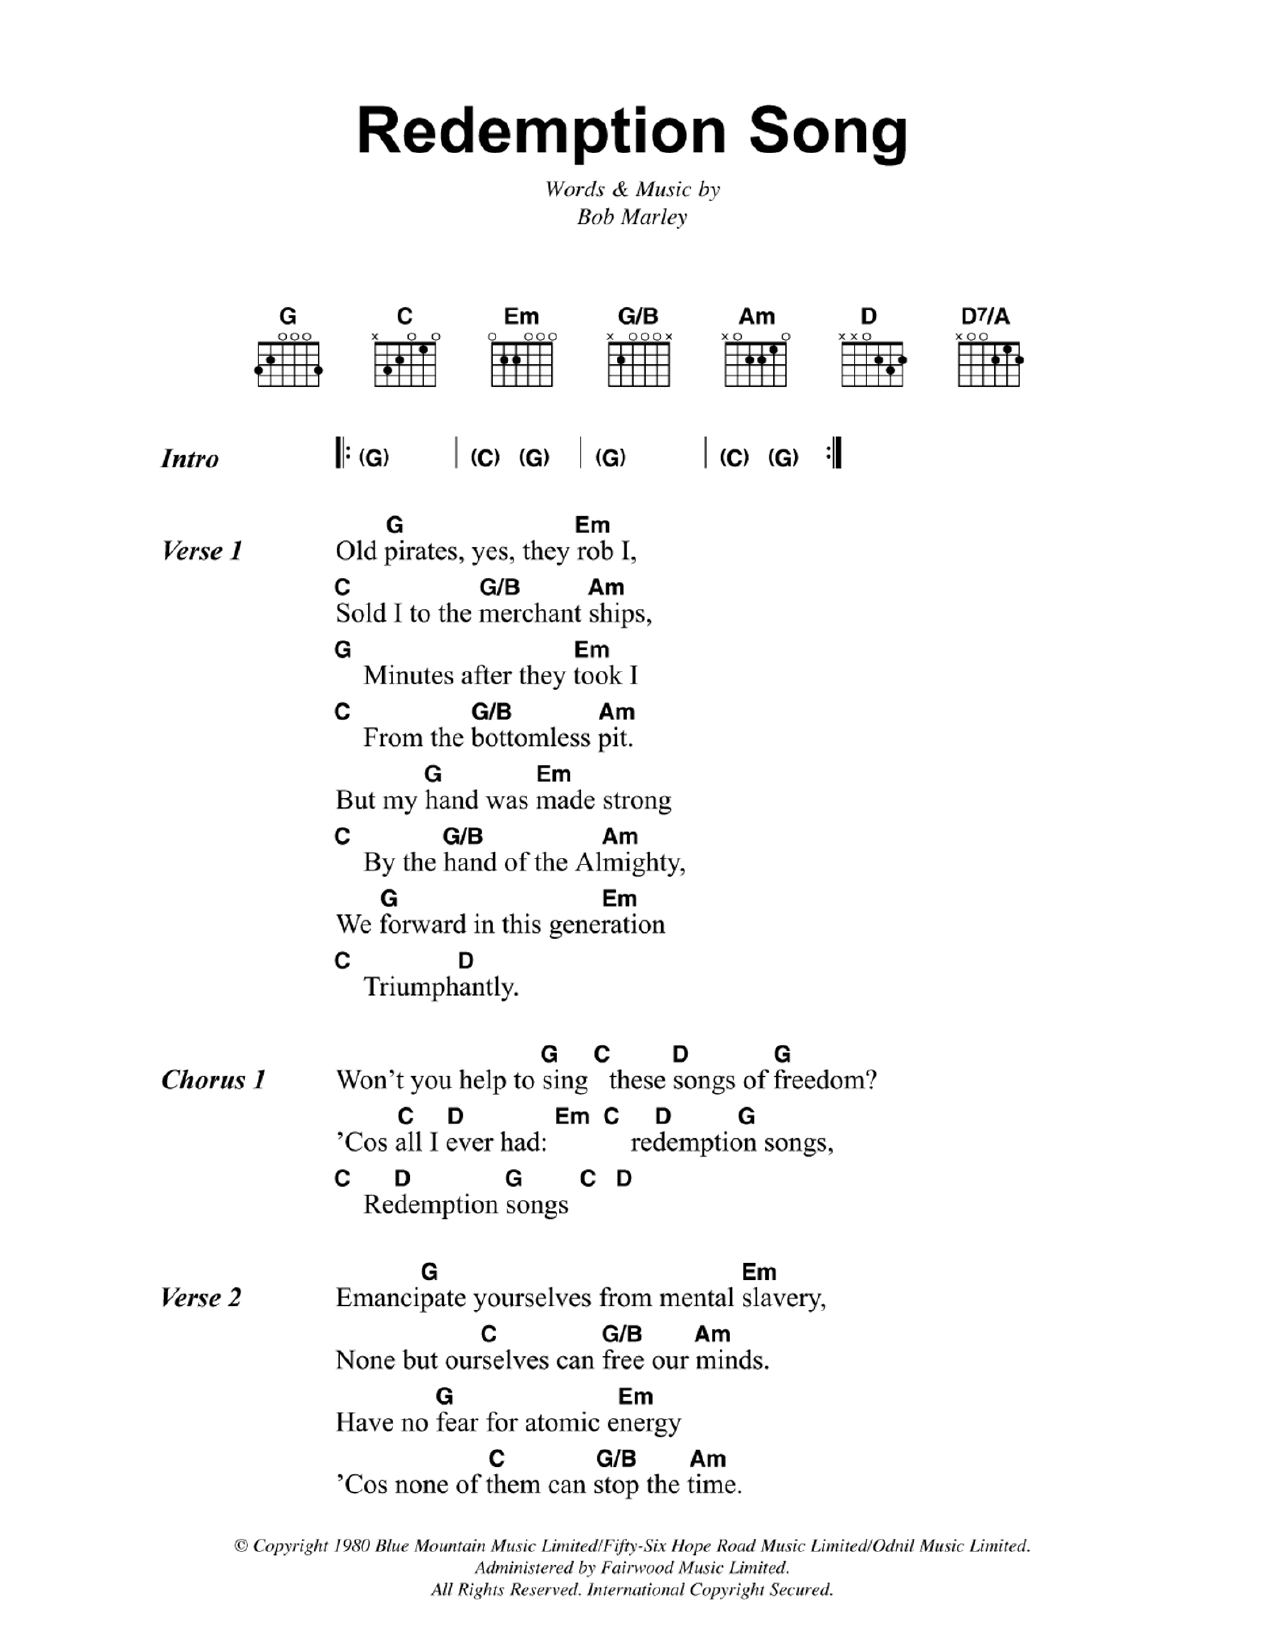 Download Bob Marley Redemption Song Sheet Music